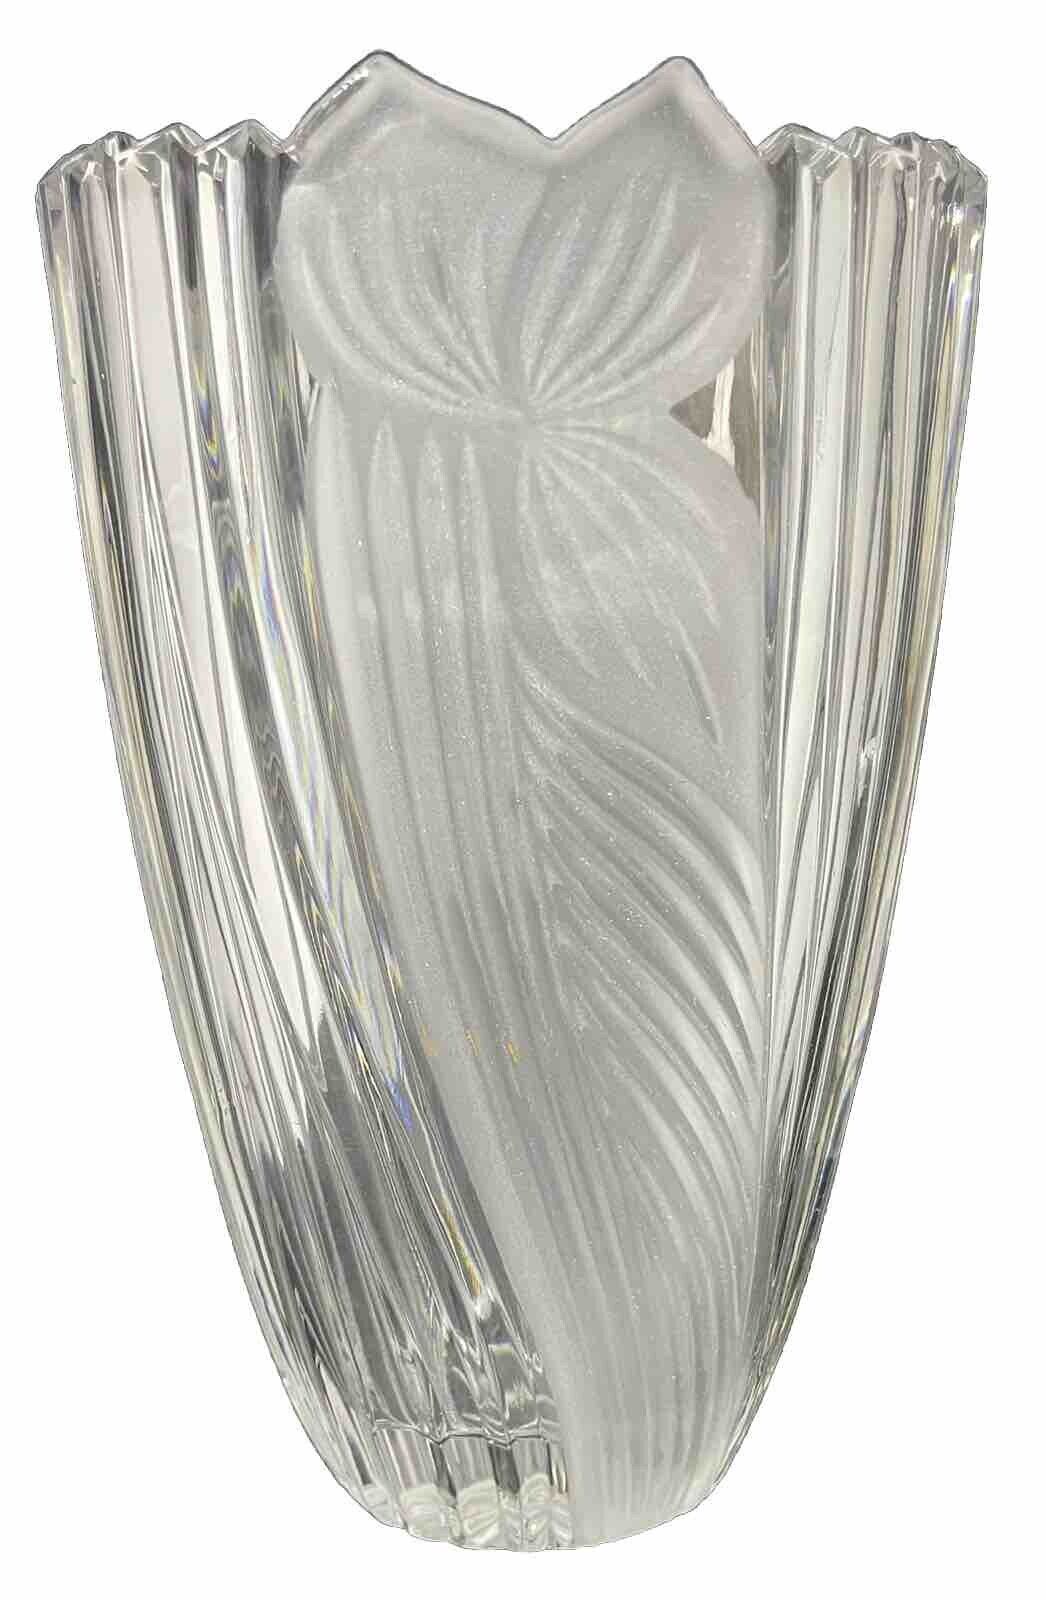 ANNE HUTTE LEAD CRYSTAL SWIRL FROSTED VASE IRIS ON BOTHS SIDES SAWTOOTH RIM